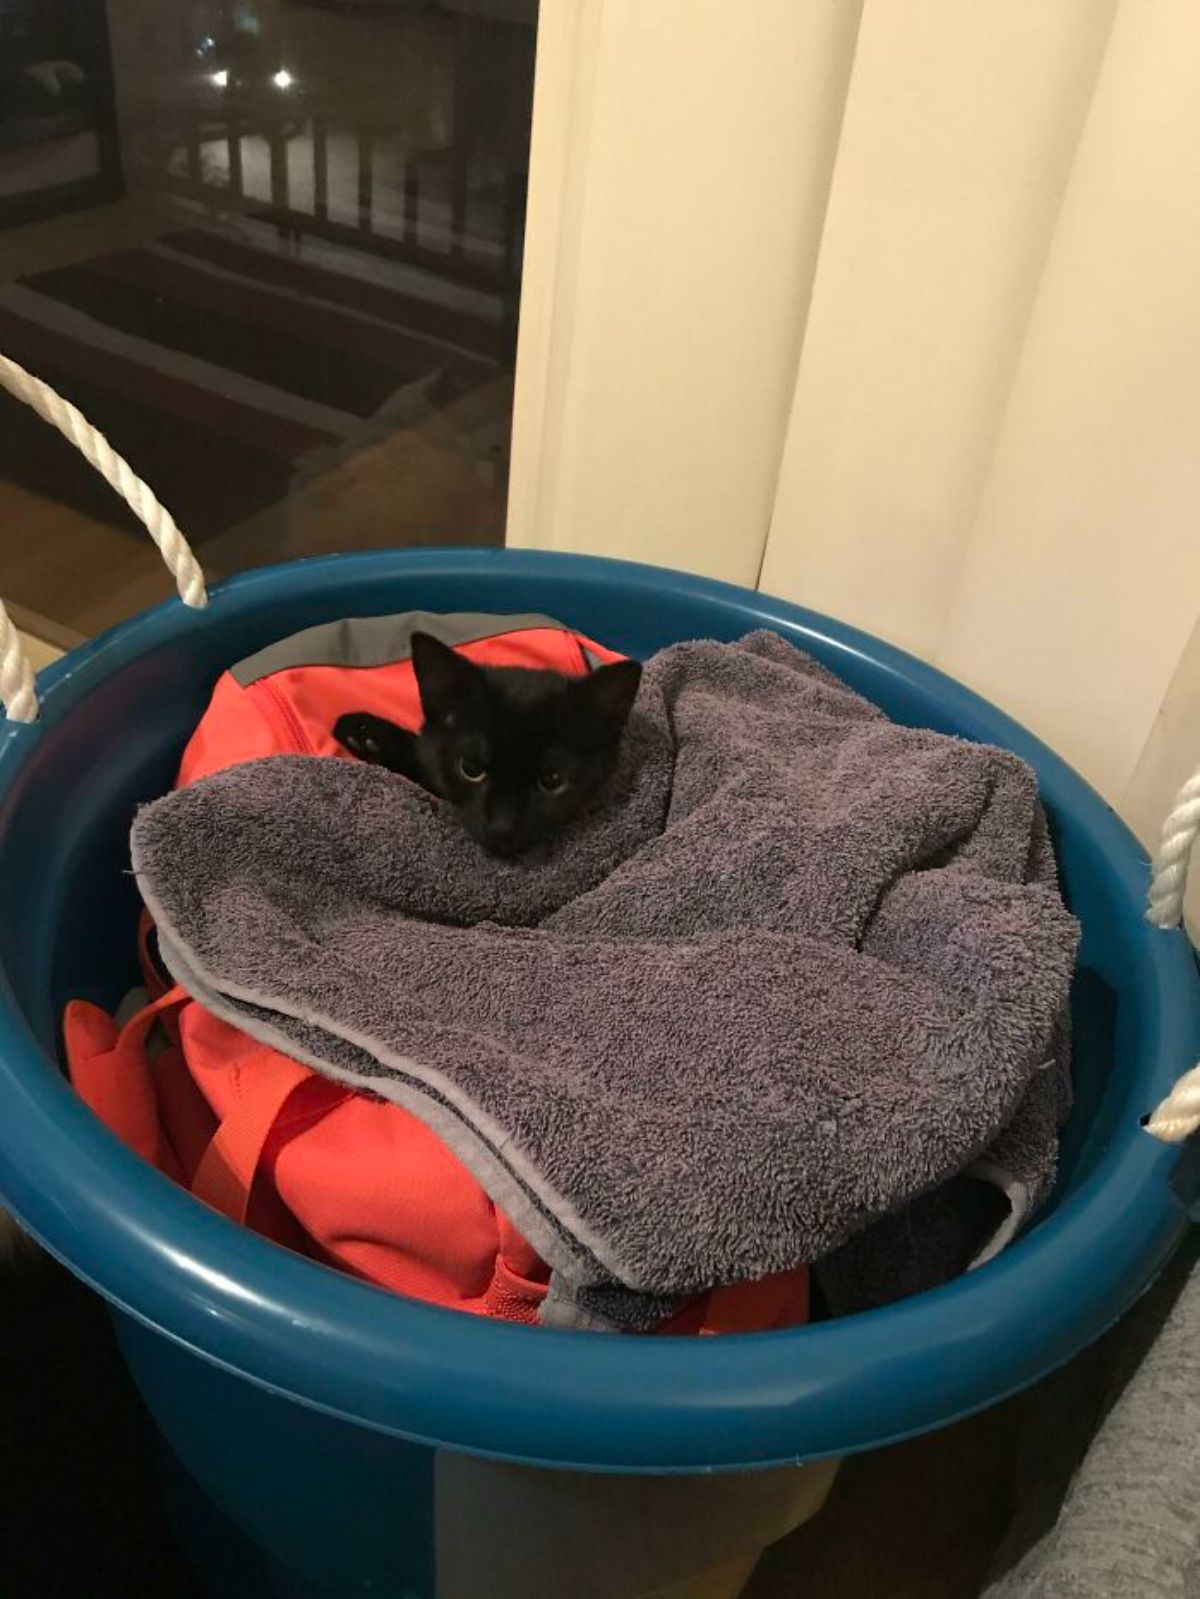 black kitten laying in a blue laundry basket tucked in under a dark grey towel